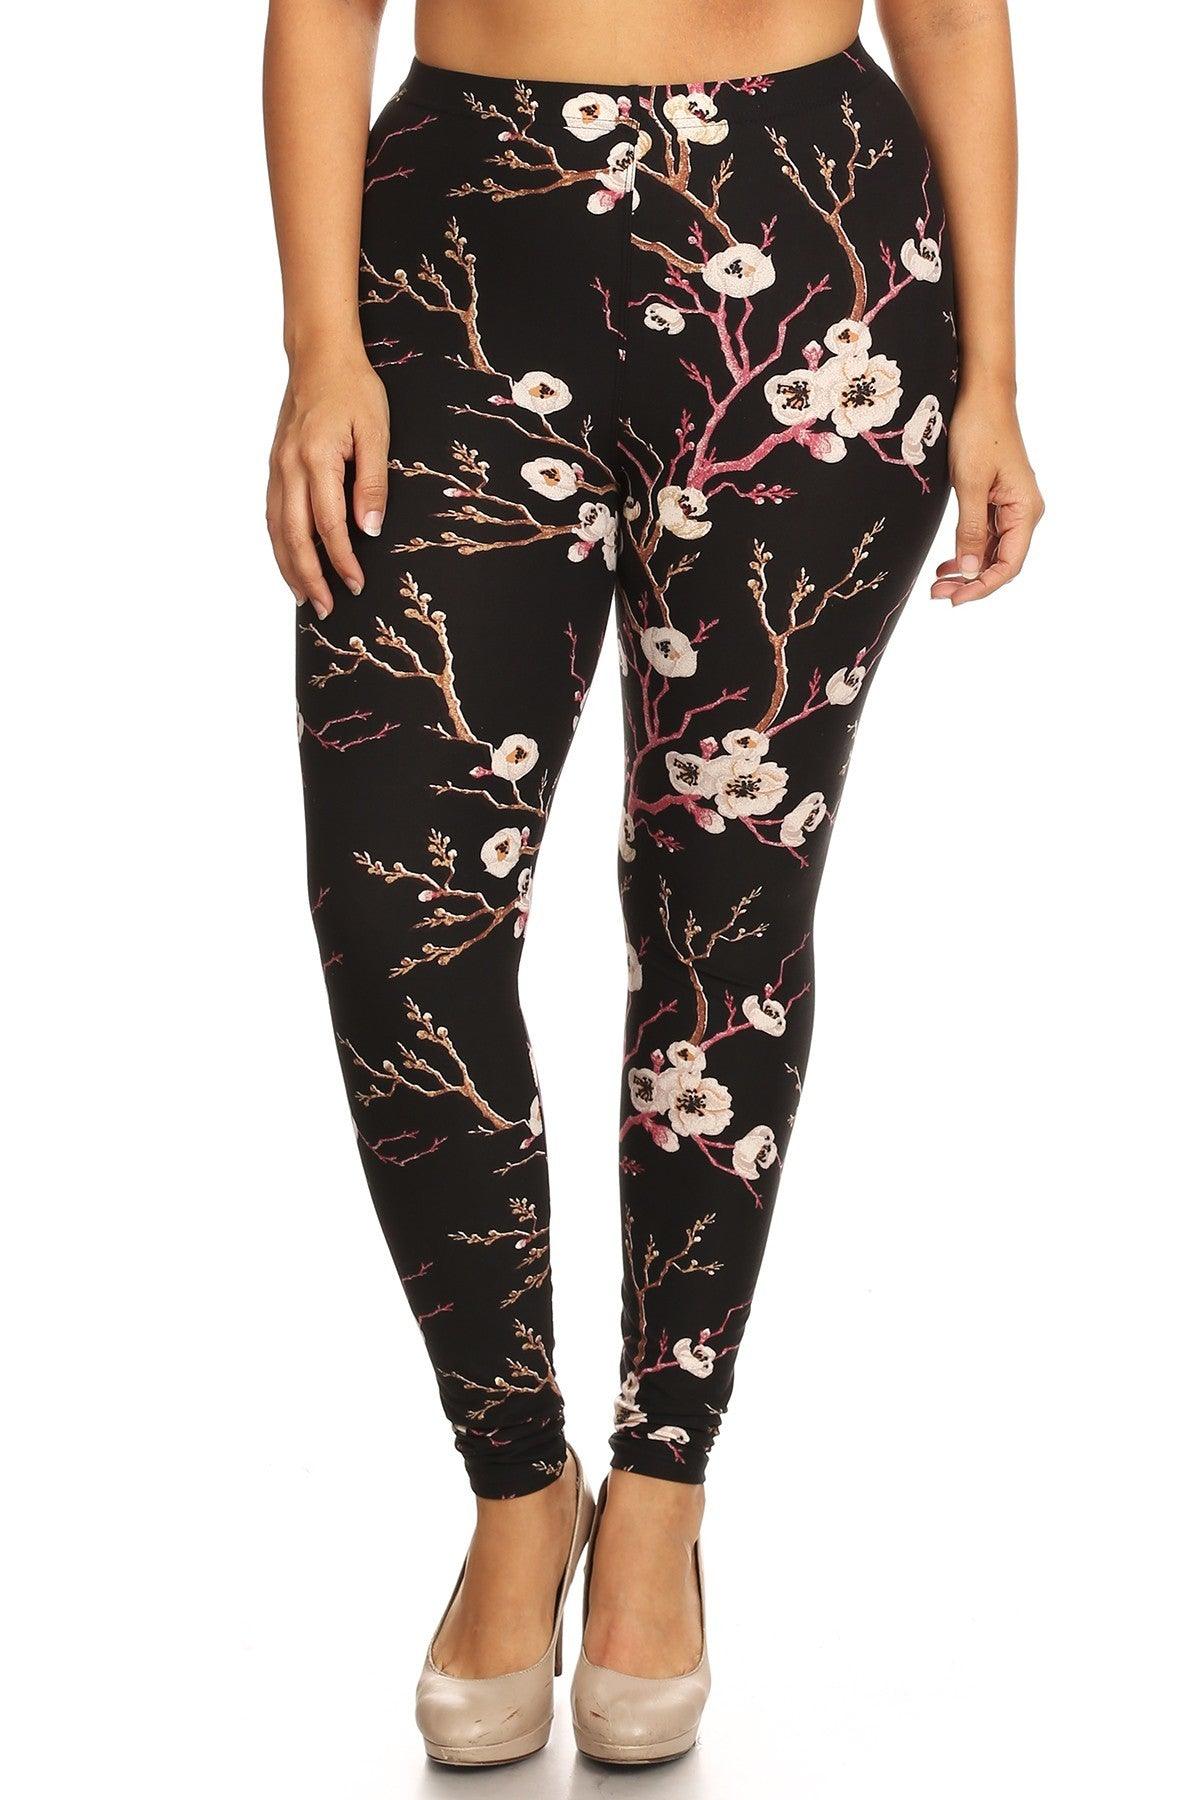 Plus Size Floral Print, Full Length Leggings In A Slim Fitting Style With A Banded High Waist - Kreative Passions